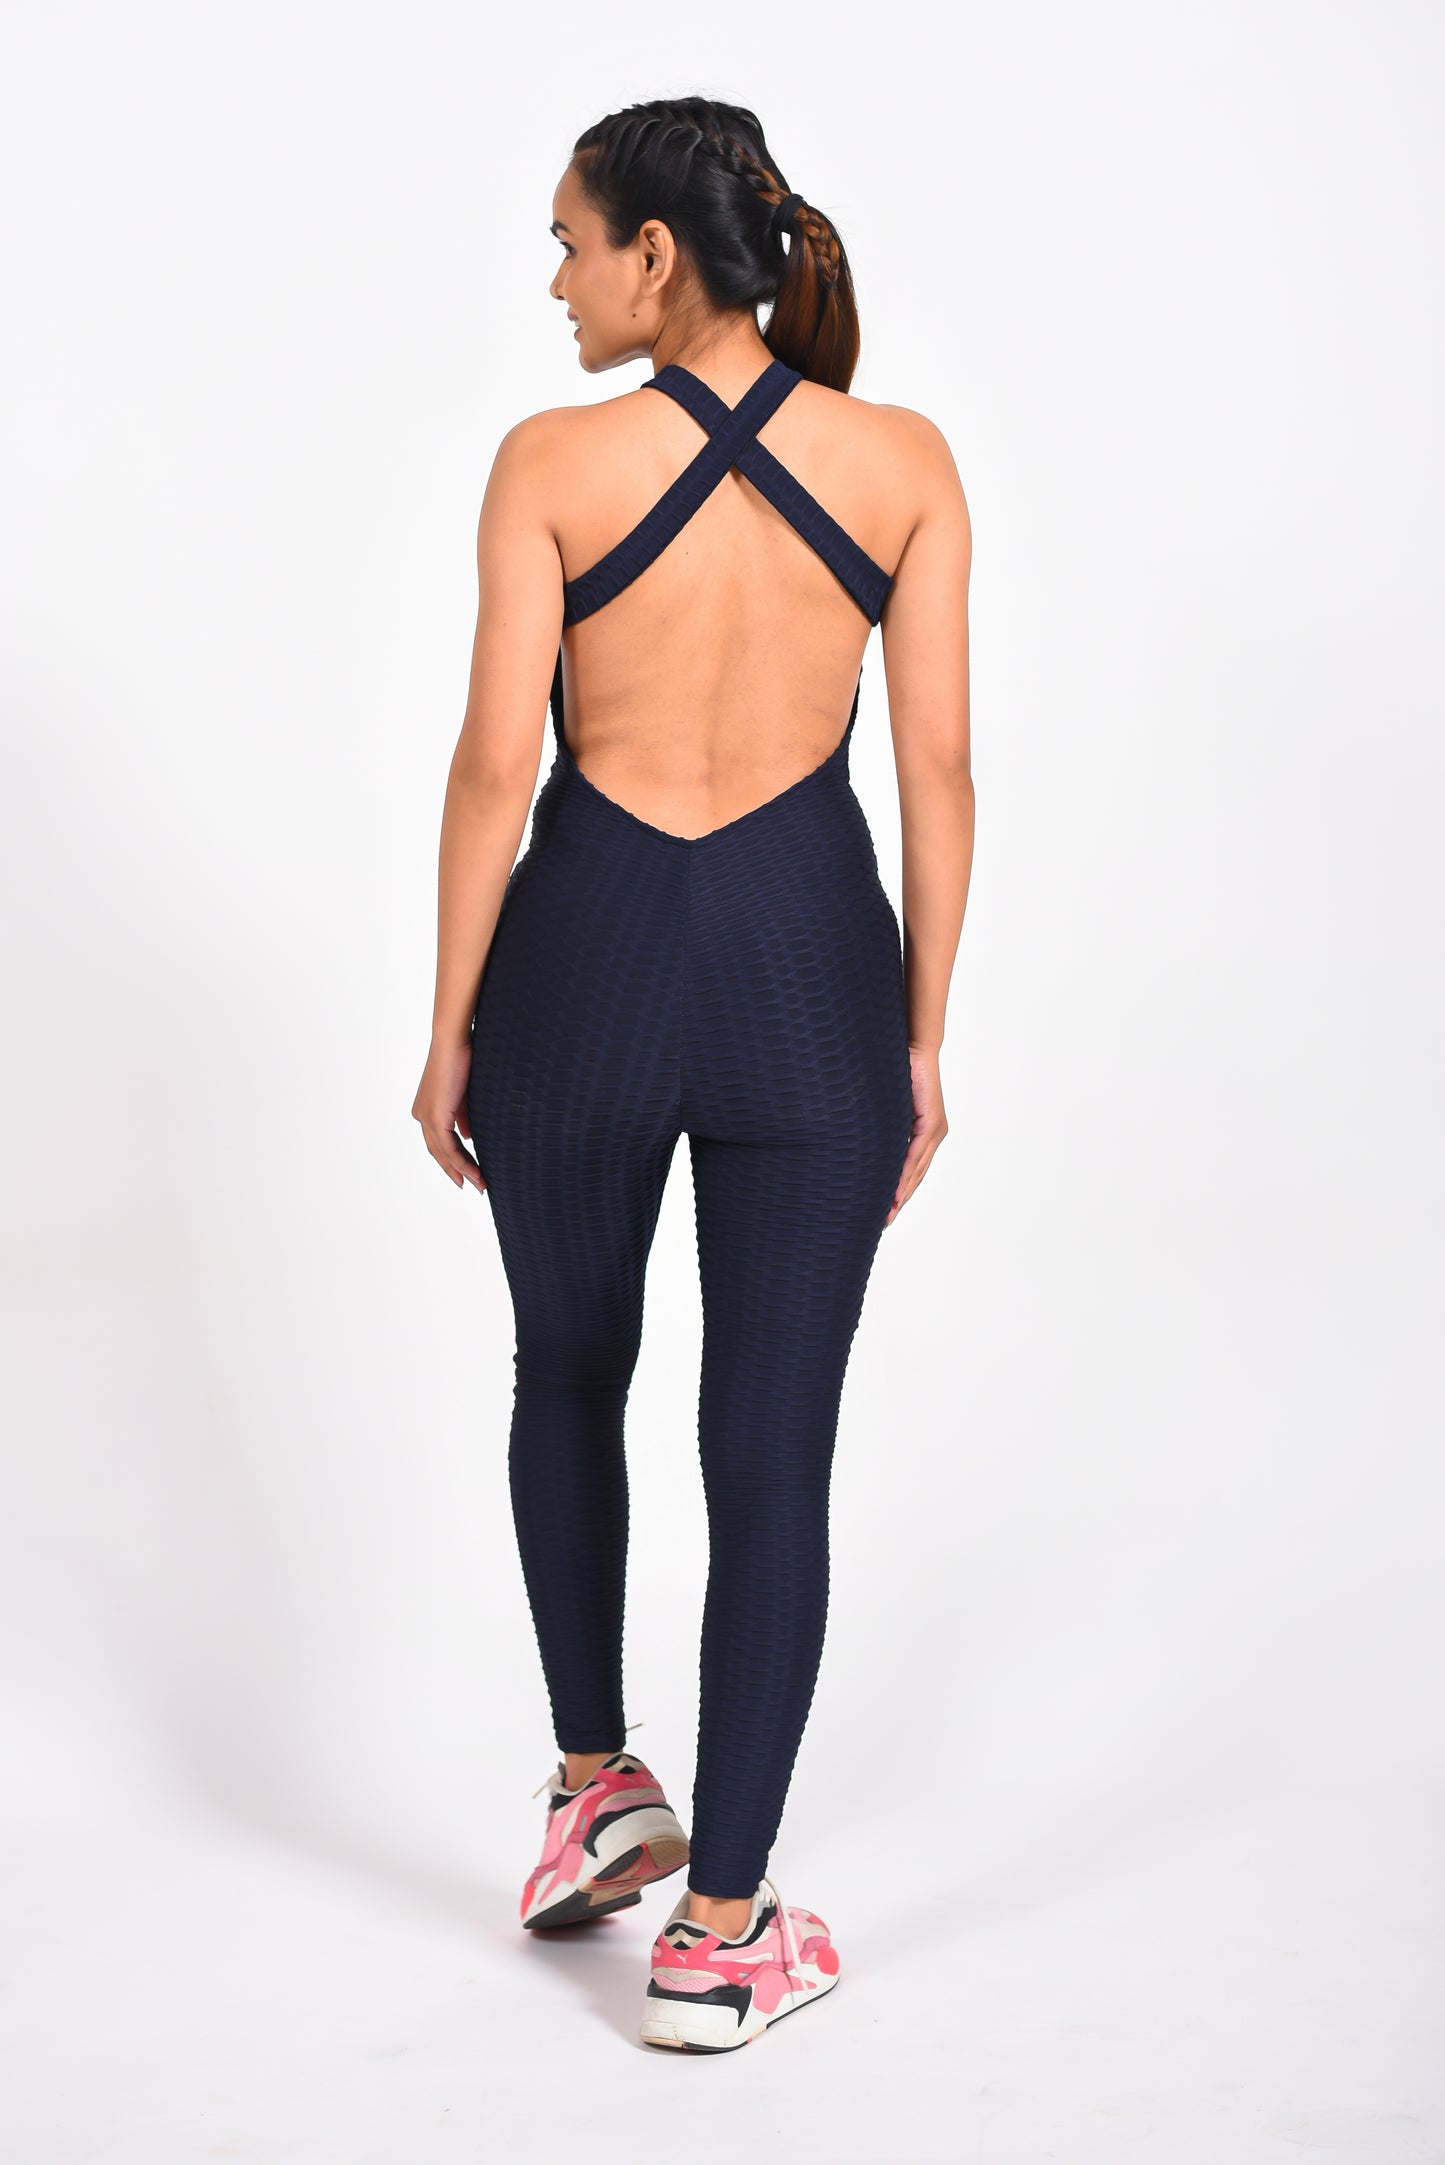 GYMSQUAD® ANTI-CELLULITE AND PUSH UP JUMPSUIT - NAVY